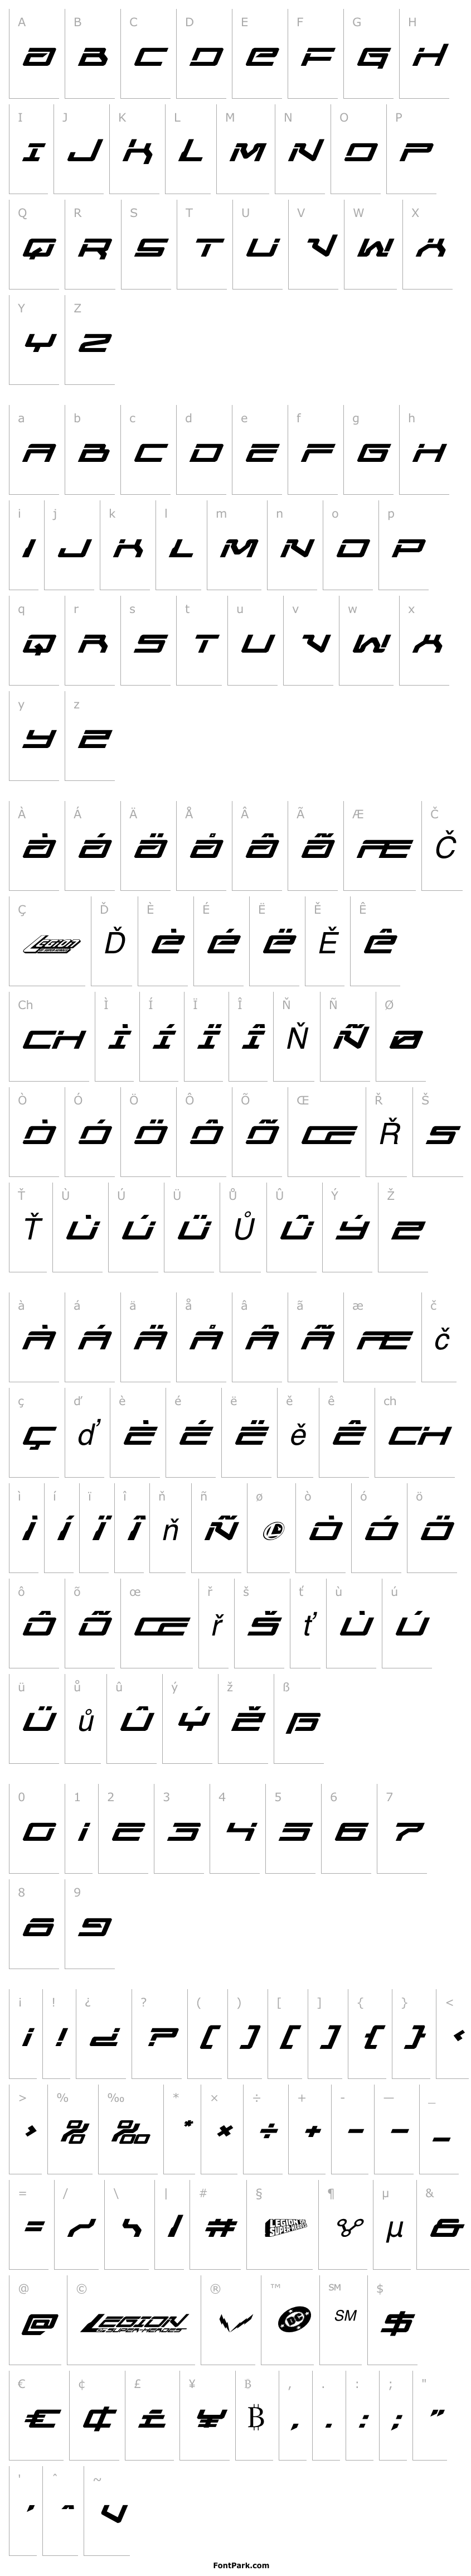 Overview United Planets Expanded Italic